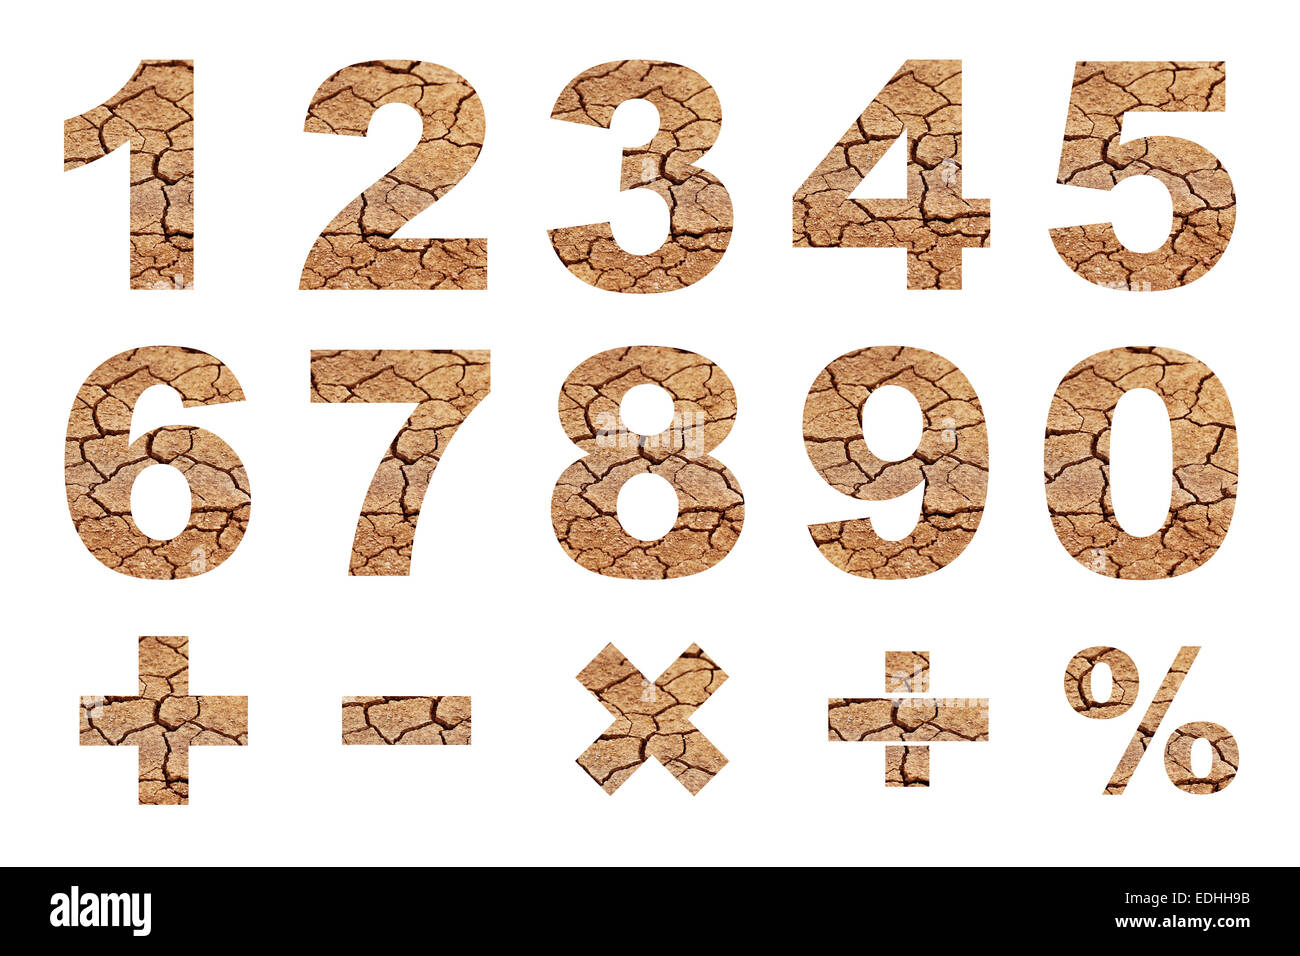 one to zero numbers and basic mathematical symbols made from dry cracked earth picture Stock Photo